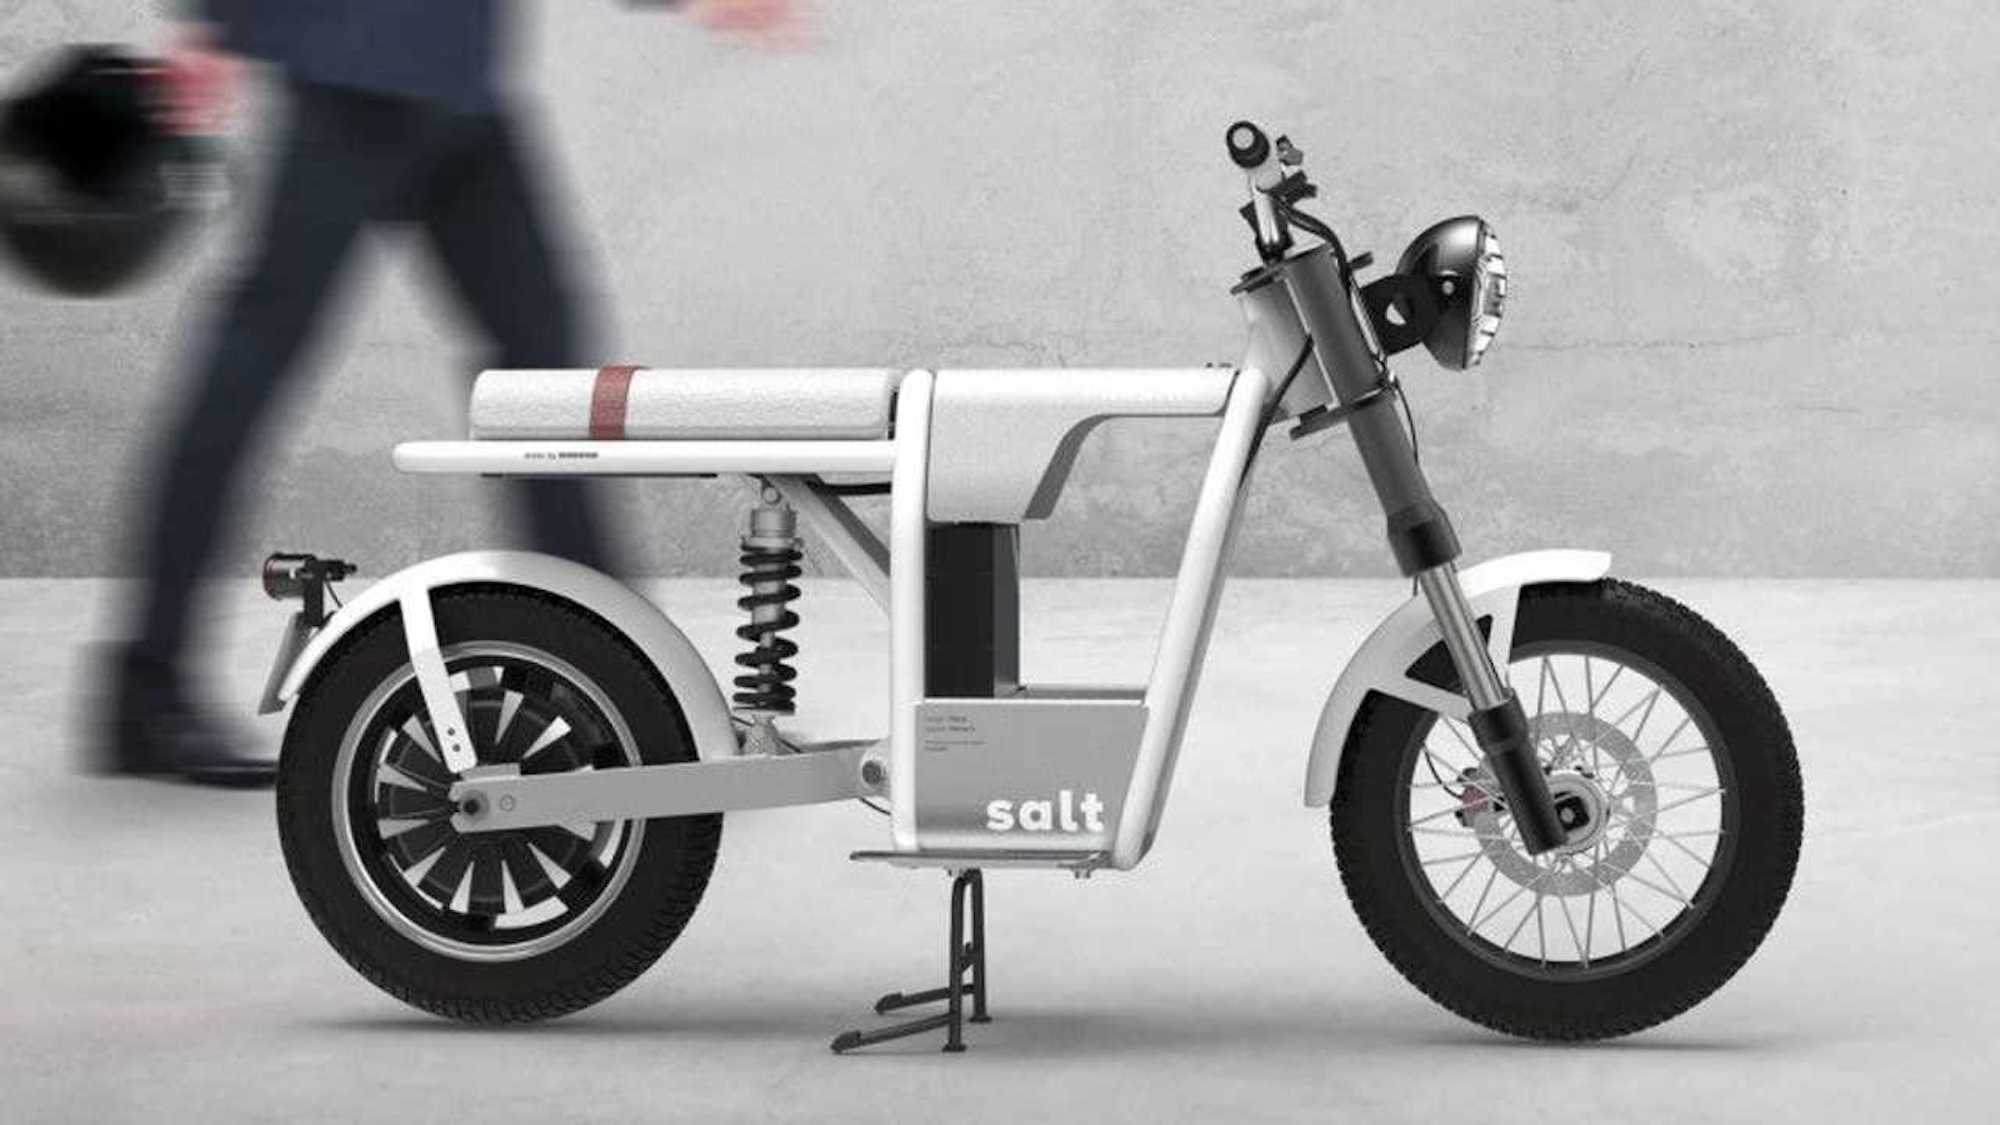 The 'MIUNIK Salt,' an electric concept from the minds at ID DESIGN. Media sourced from RideApart.